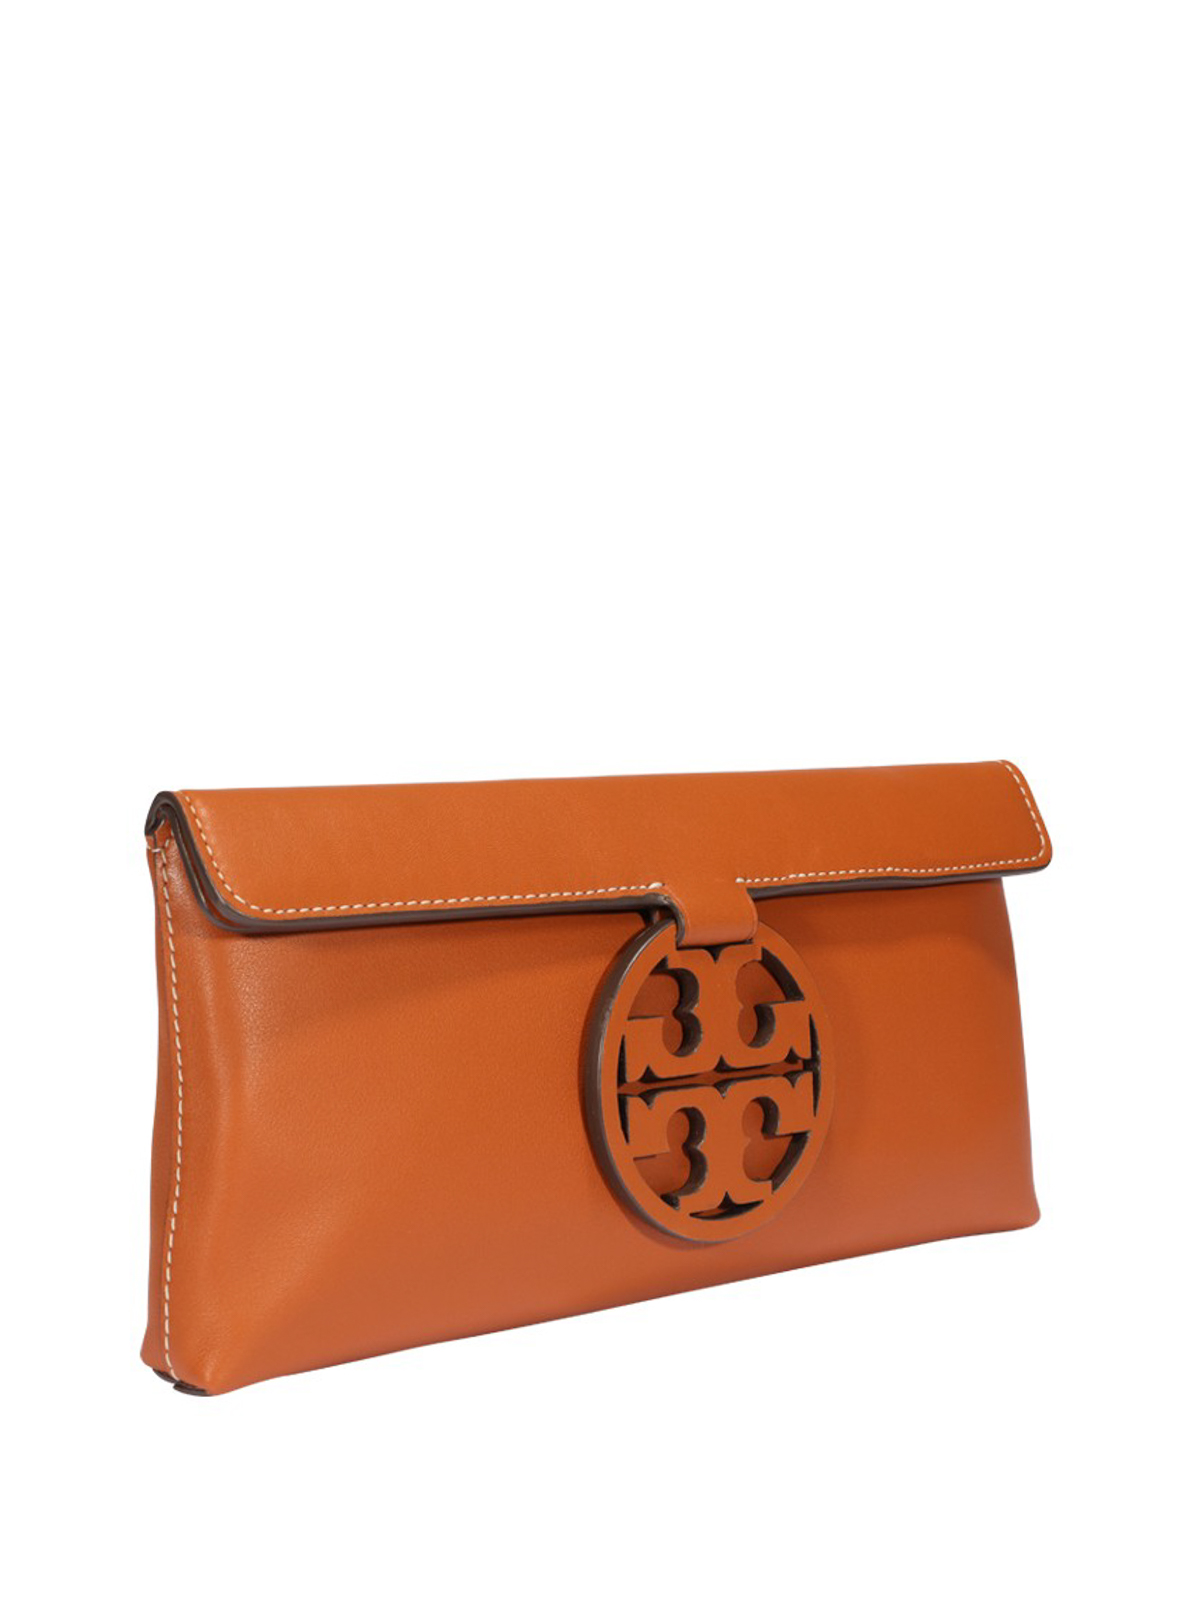 Clutches Tory Burch - Miller clutch - 56267268 | Shop online at iKRIX